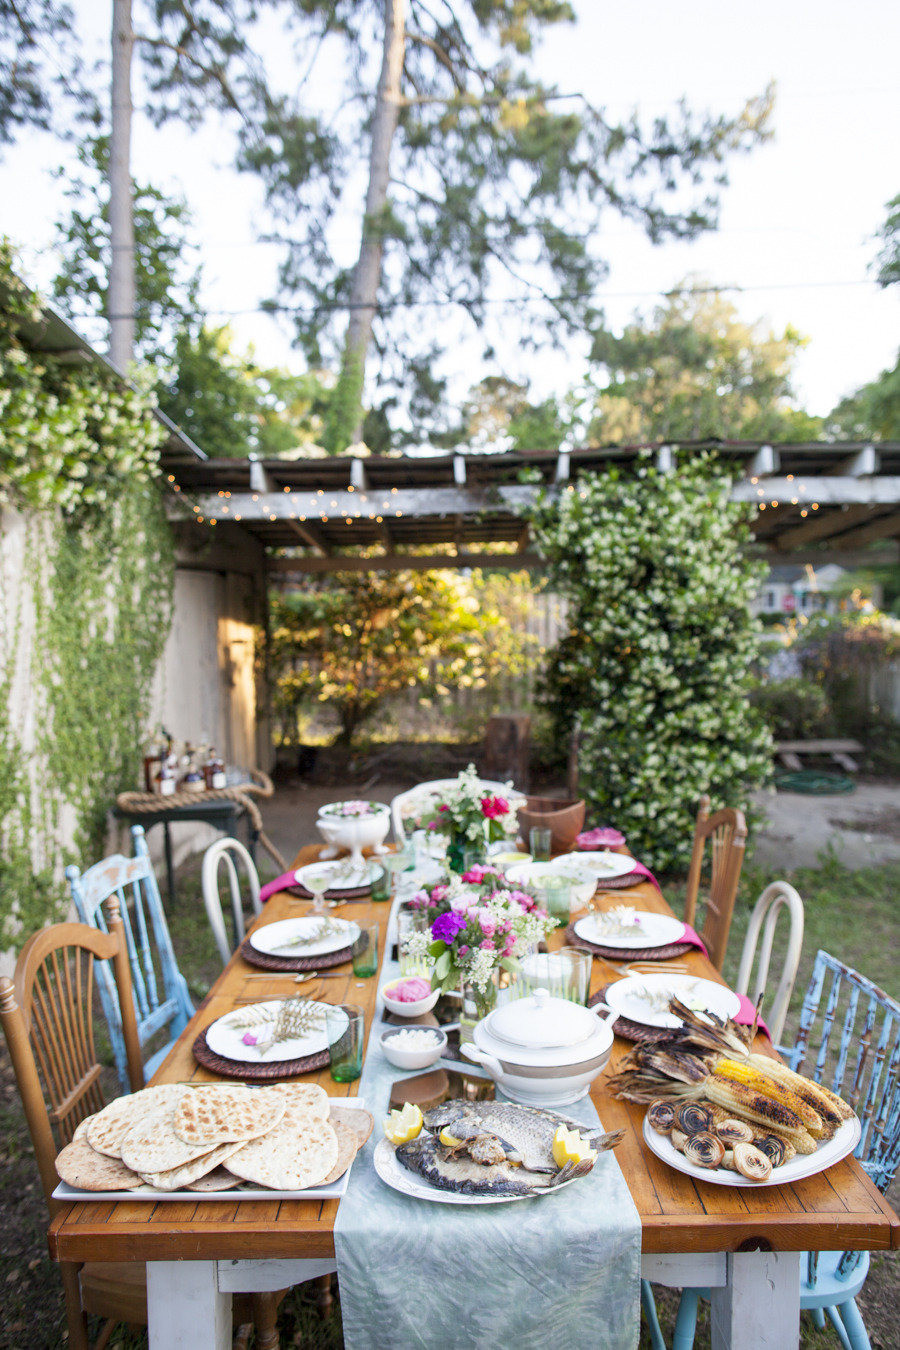 Elegant Backyard Party Ideas
 50 Outdoor Party Ideas You Should Try Out This Summer